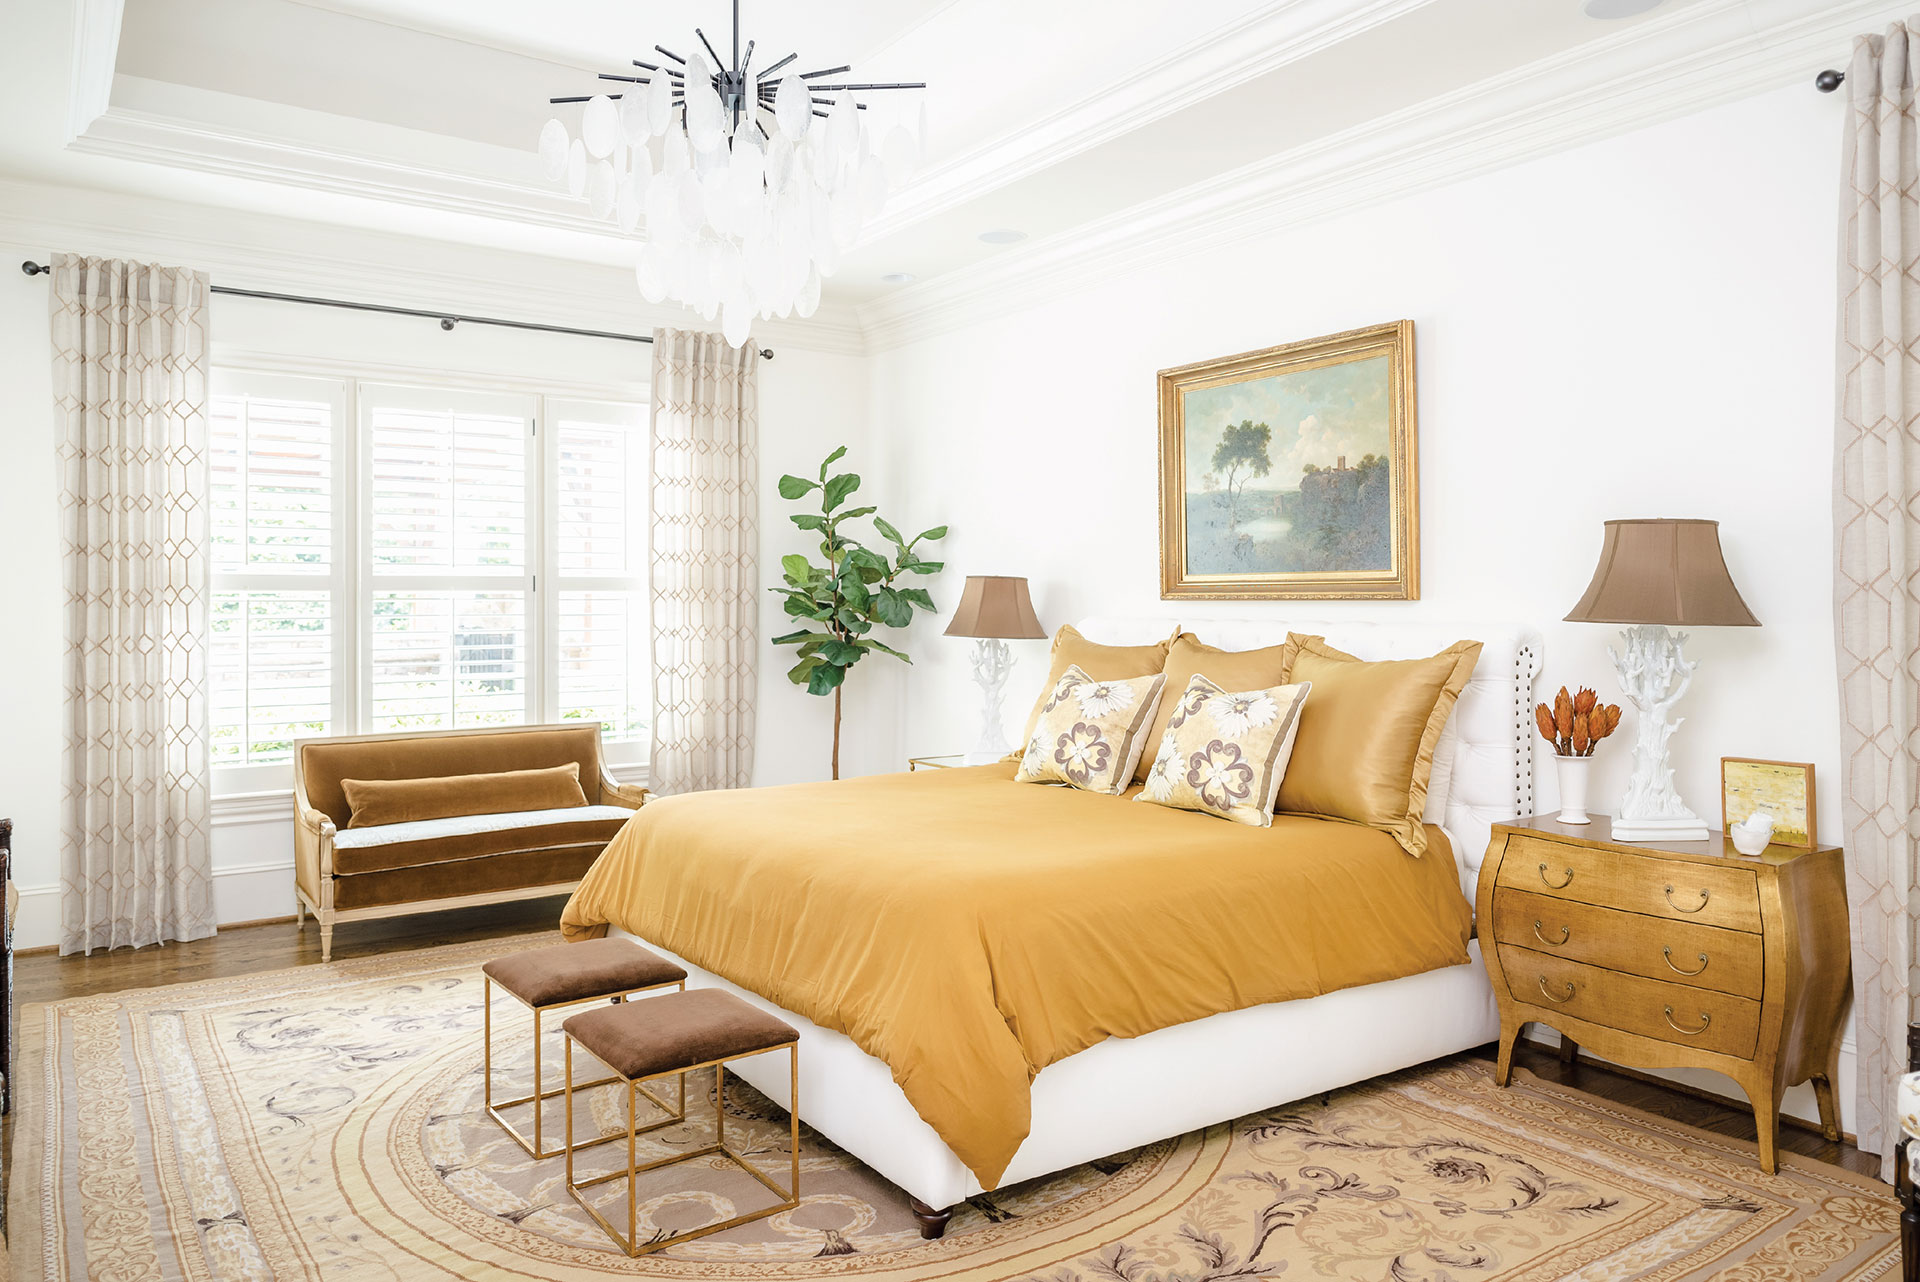 Try one of these bold and trendy color schemes in the bedroom